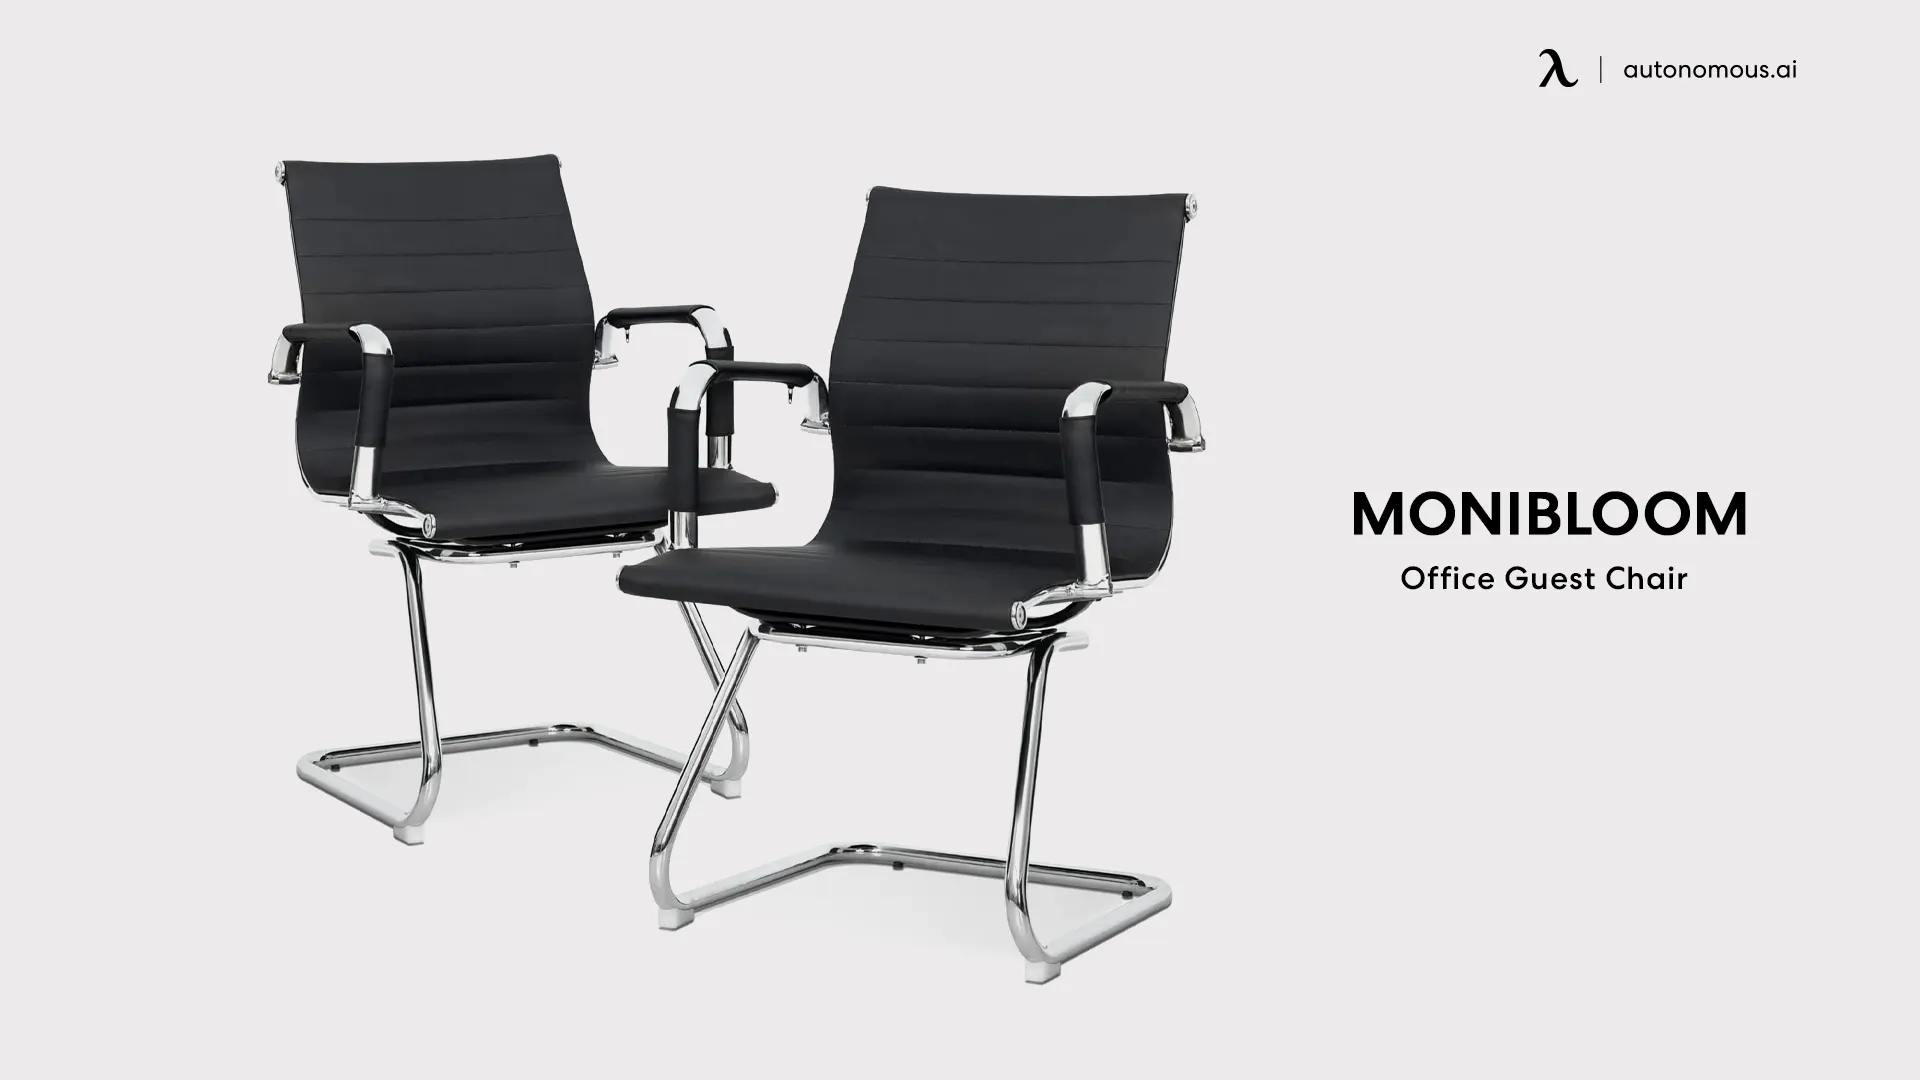 MoNiBloom Office Guest Chair - desk chairs without wheels